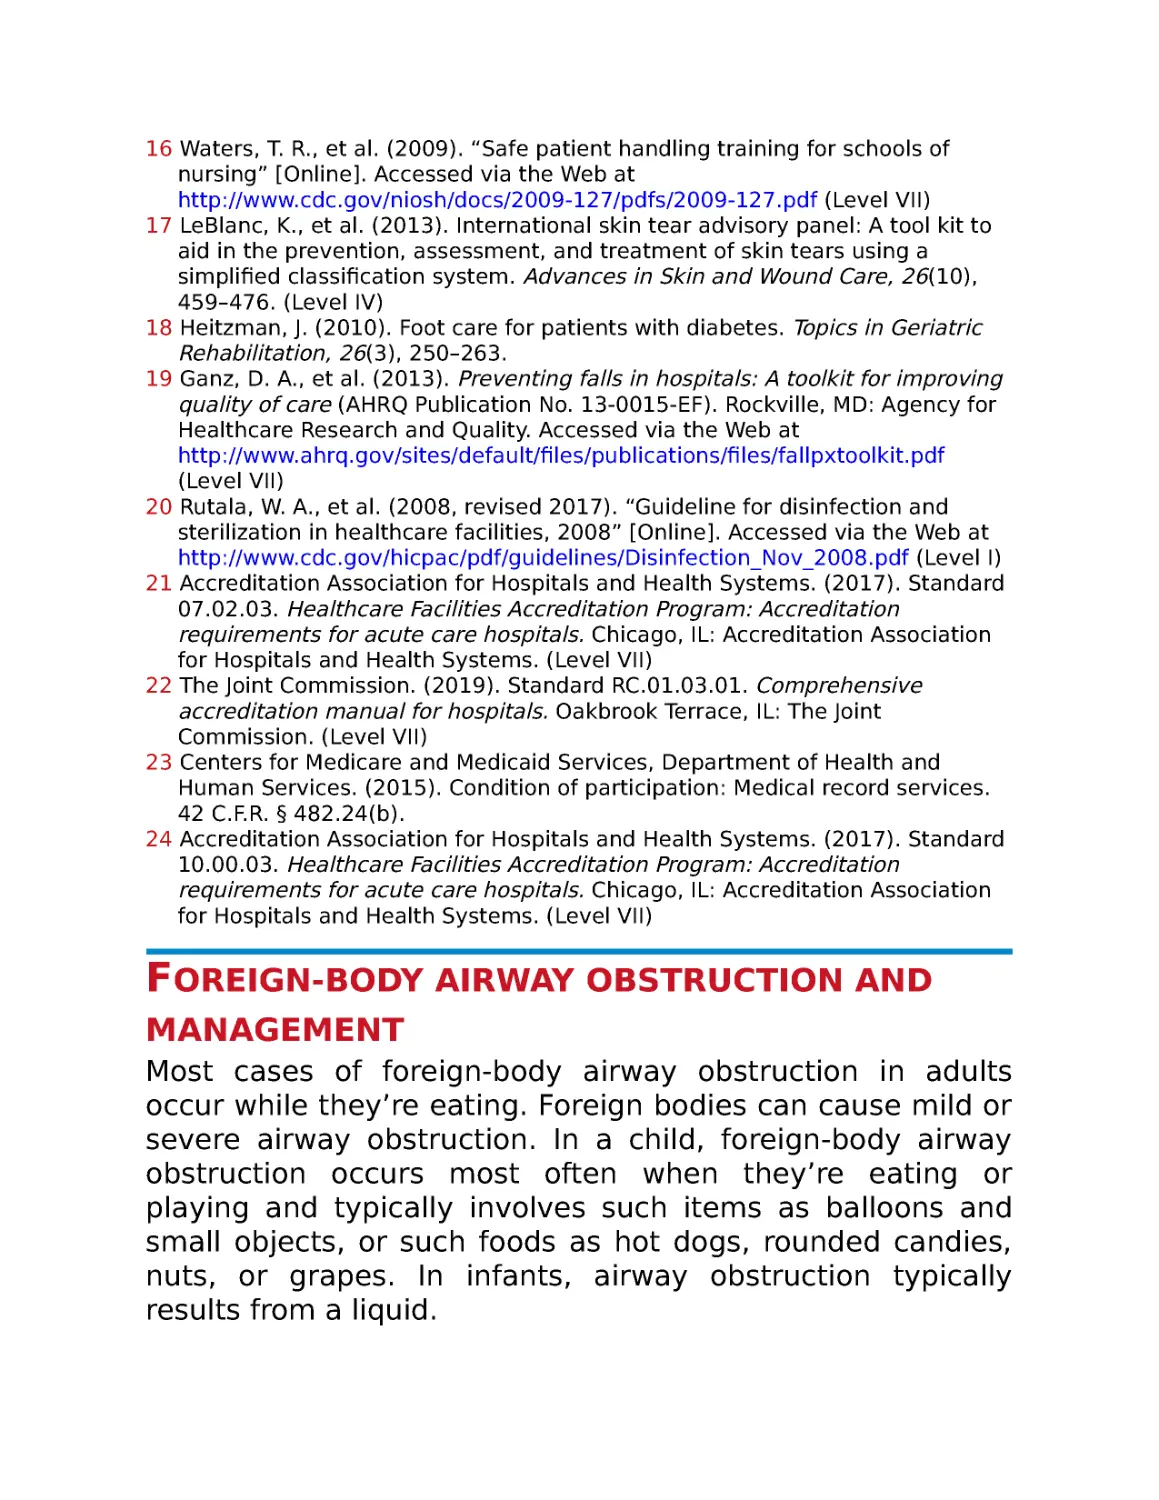 Foreign-body airway obstruction and management